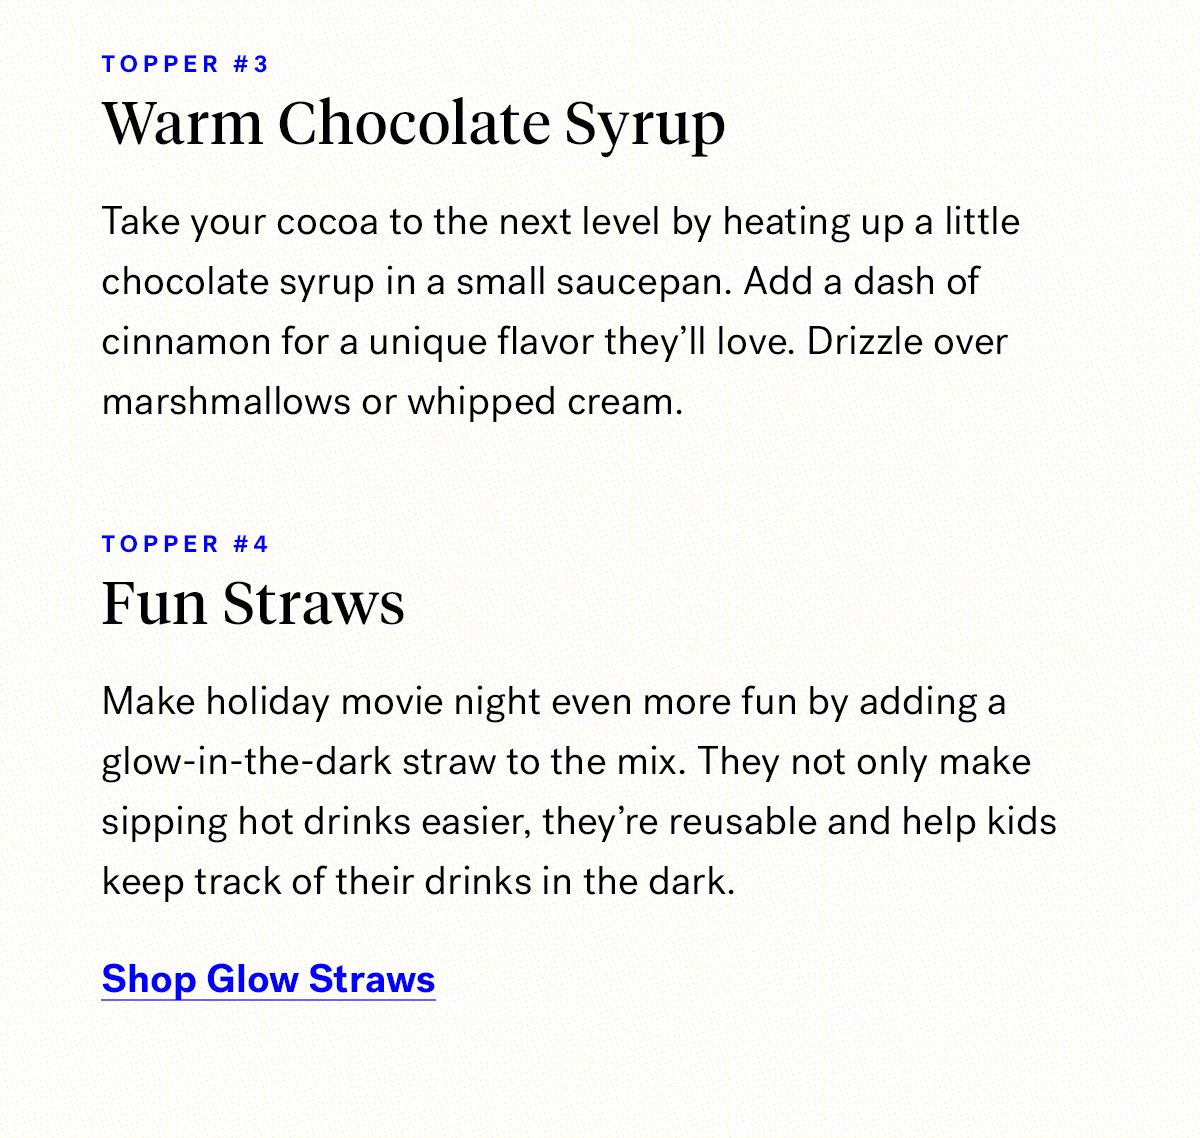       

                                Topper #3 
                                Warm chocolate syrup
                                
                                Take your cocoa to the next level by heating up a little chocolate syrup in a small saucepan. 
                                Add a dash of cinnamon for a unique flavor they'll love. Drizzle over marshmallows or whipped cream.
                           
                                Topper #4

                                Fun Straws
                                
                                Make holiday movie night even more fun by adding a glow-in-the-dark straw to the mix. 
                                They not only make sipping hot drinks easier, they're reusable and help kids keep track of their drinks in the dark.
                                
                                Shop Glow Straws

                                